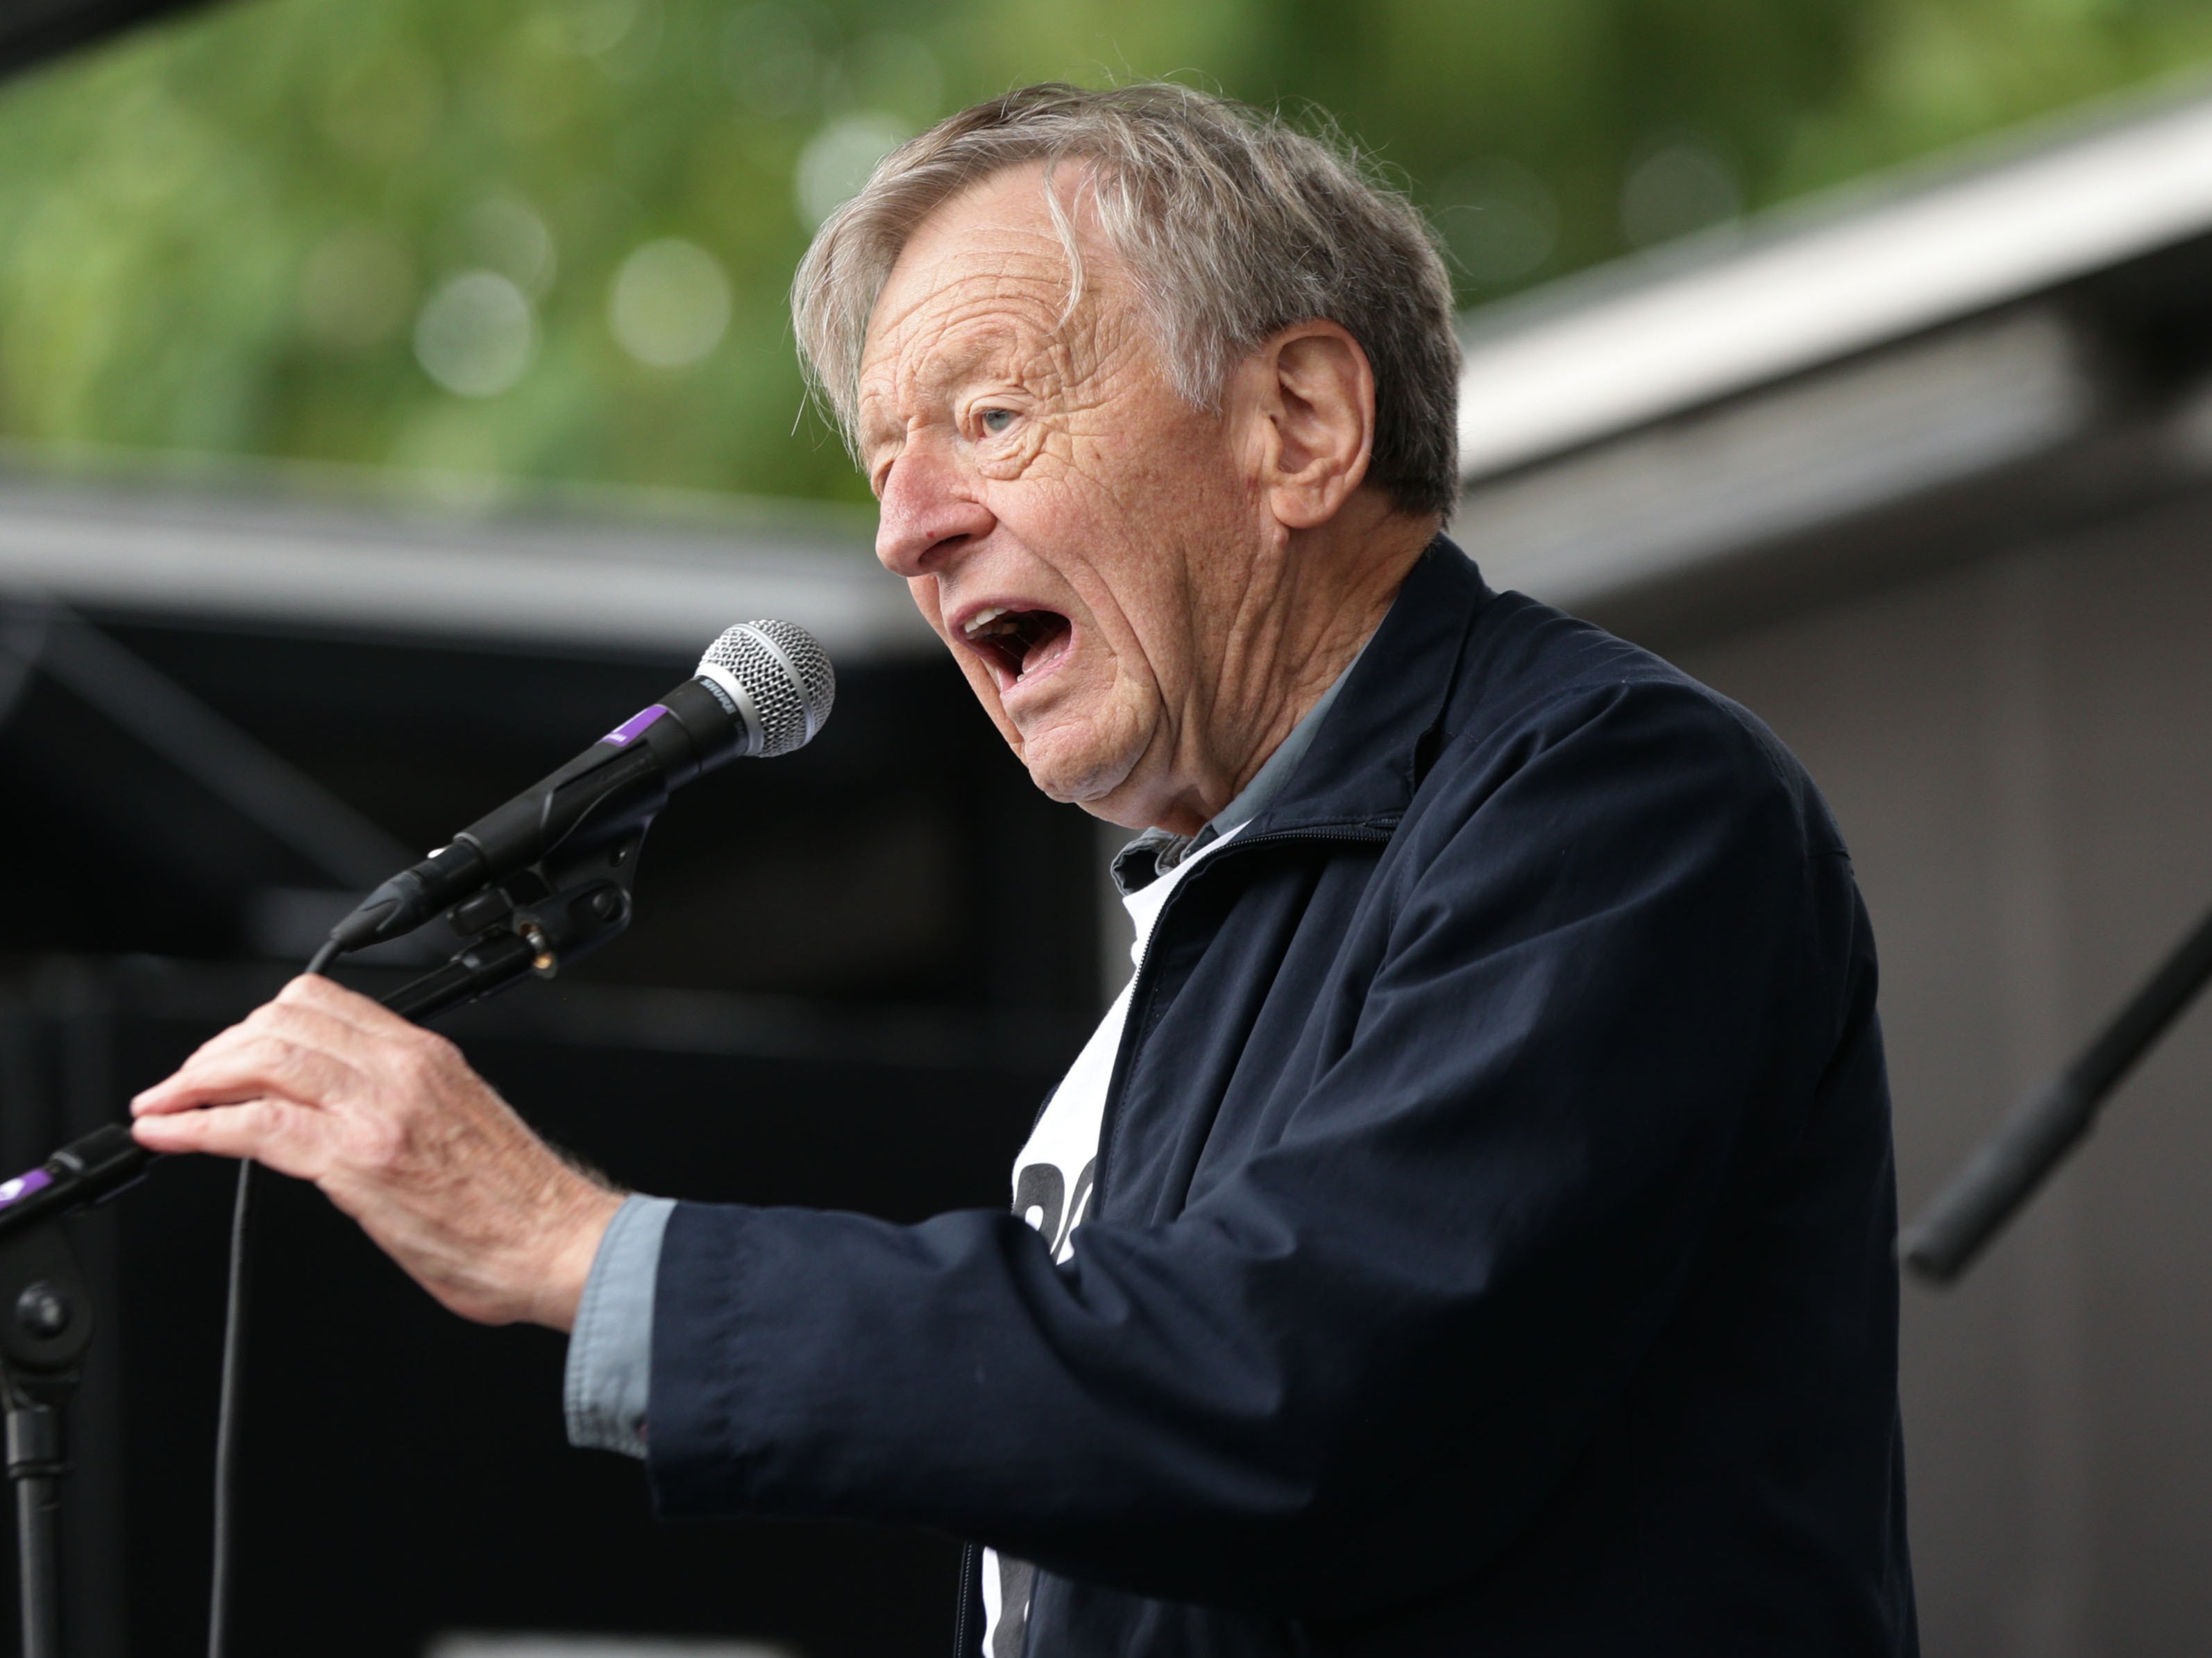 Lord Dubs, who fled the Nazis, is veteran campaigner for refugees